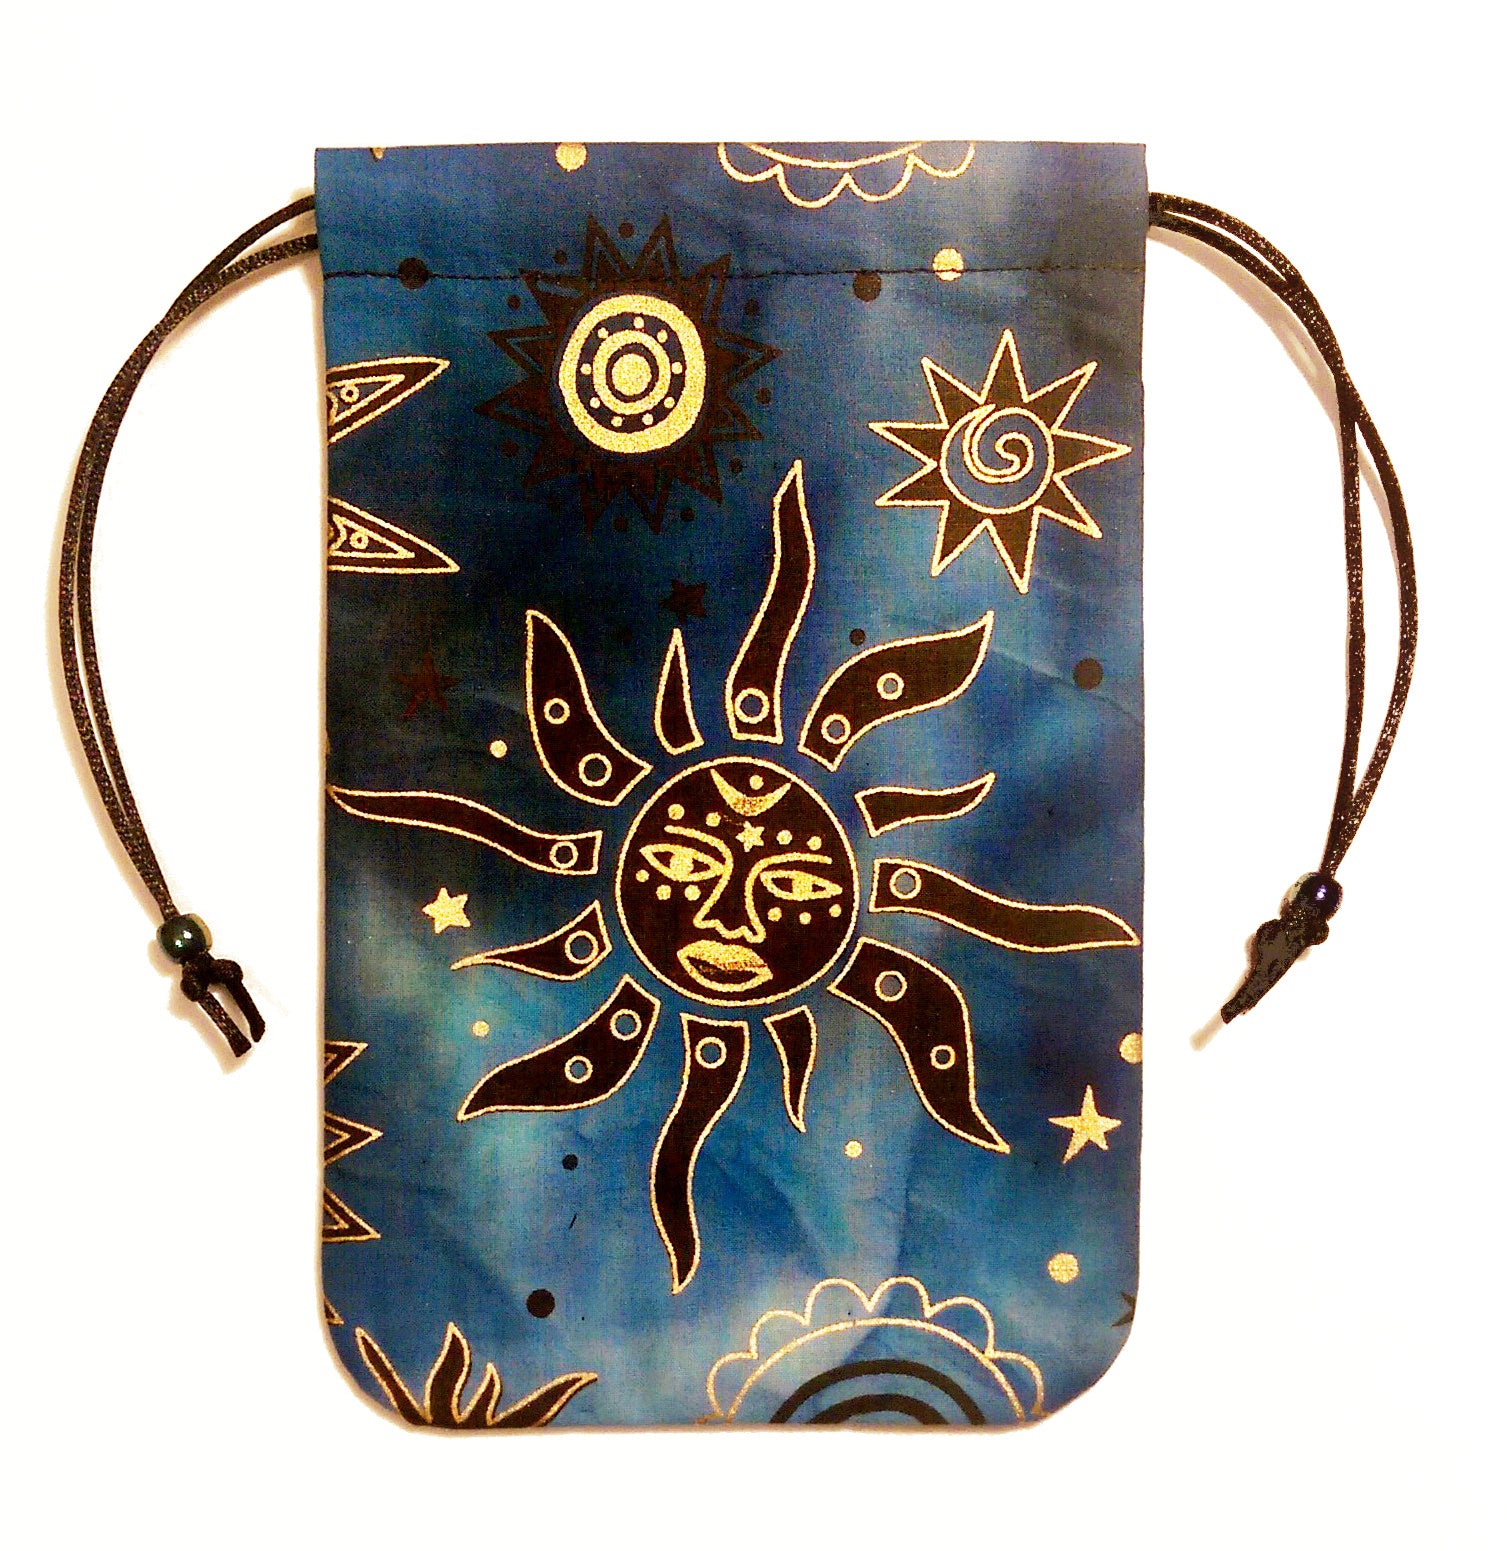 The Moon Tote Bag in Thick Organic Cotton Tarot Card Pattern